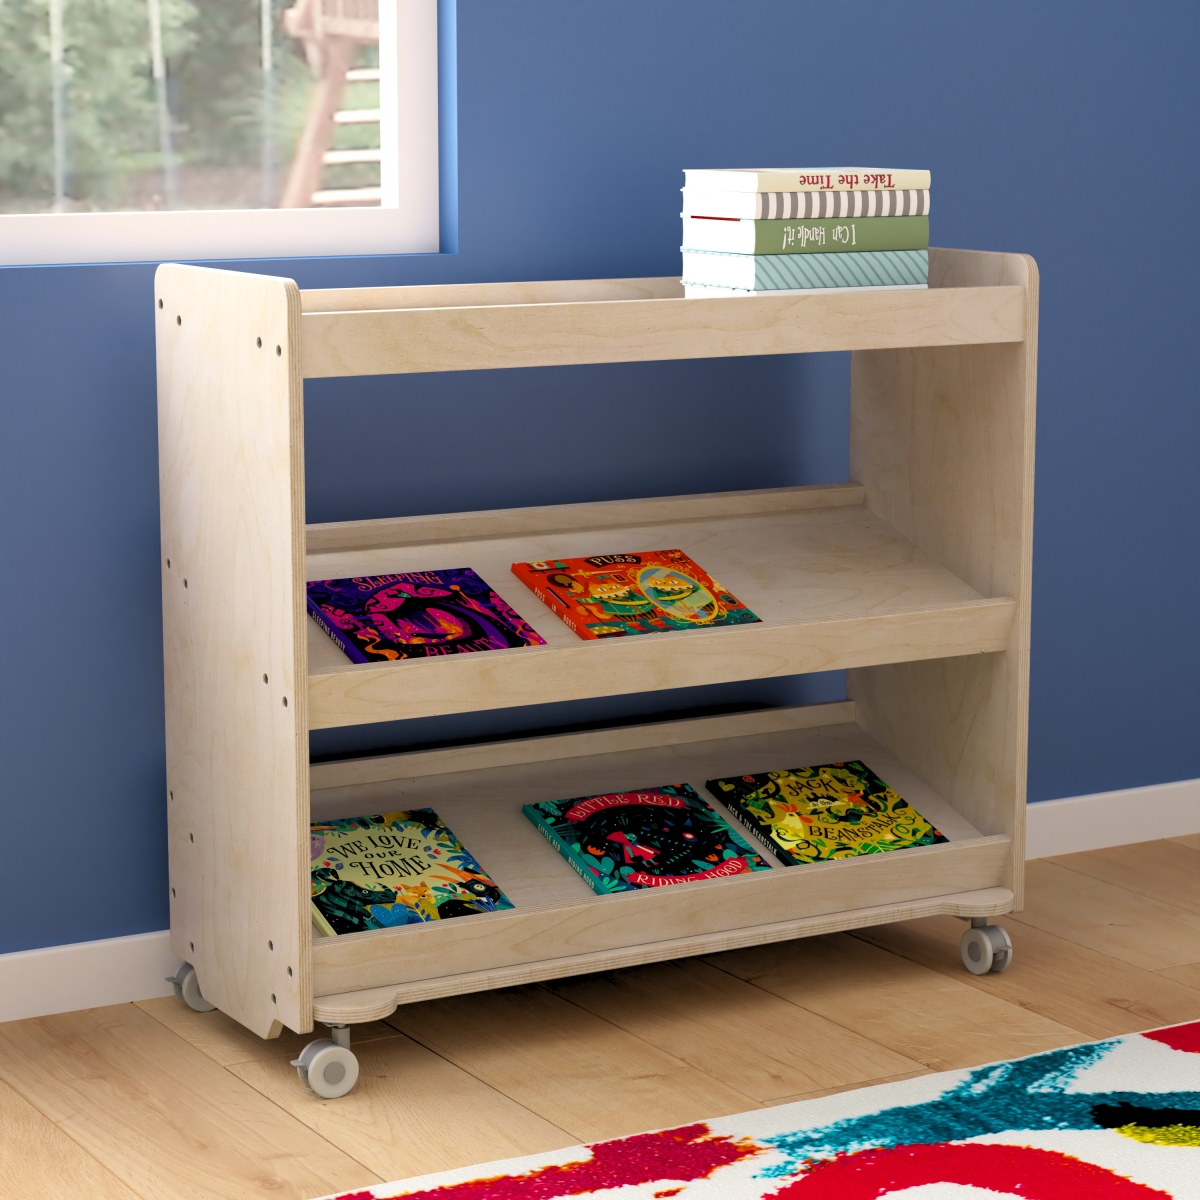 Picture of Flash Furniture MK-ME13705-GG Bright Beginnings Commercial Space Saving Wooden Mobile Classroom Storage Cart - 3 Angled Shelves, Locking Caster Wheels, Kid Friendly Design, Natural